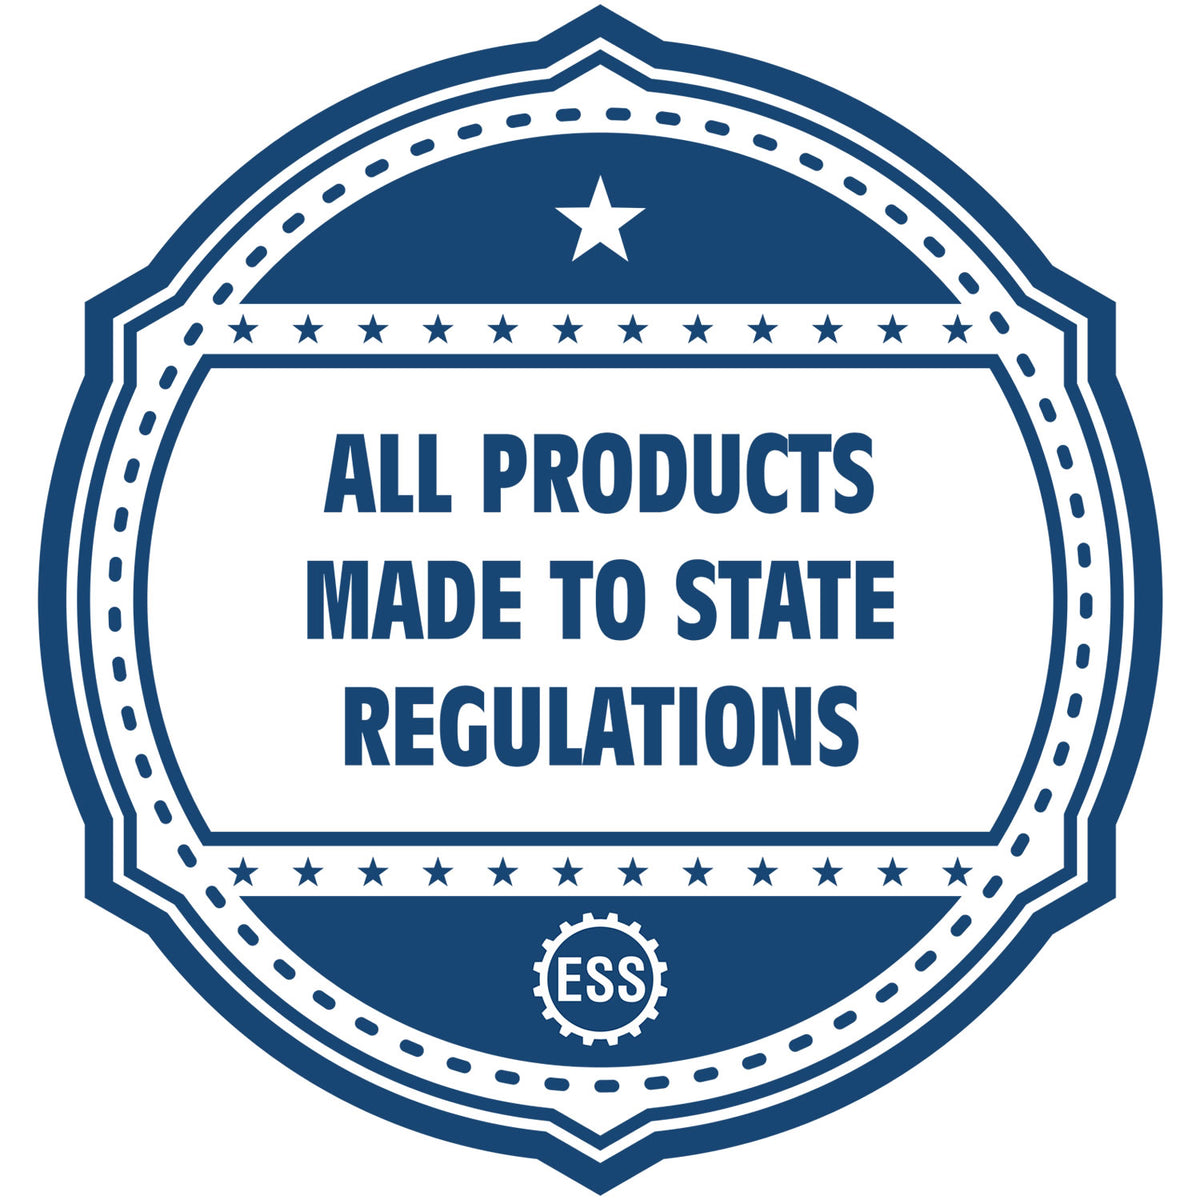 An icon or badge element for the PSI New Hampshire Notary Stamp showing that this product is made in compliance with state regulations.